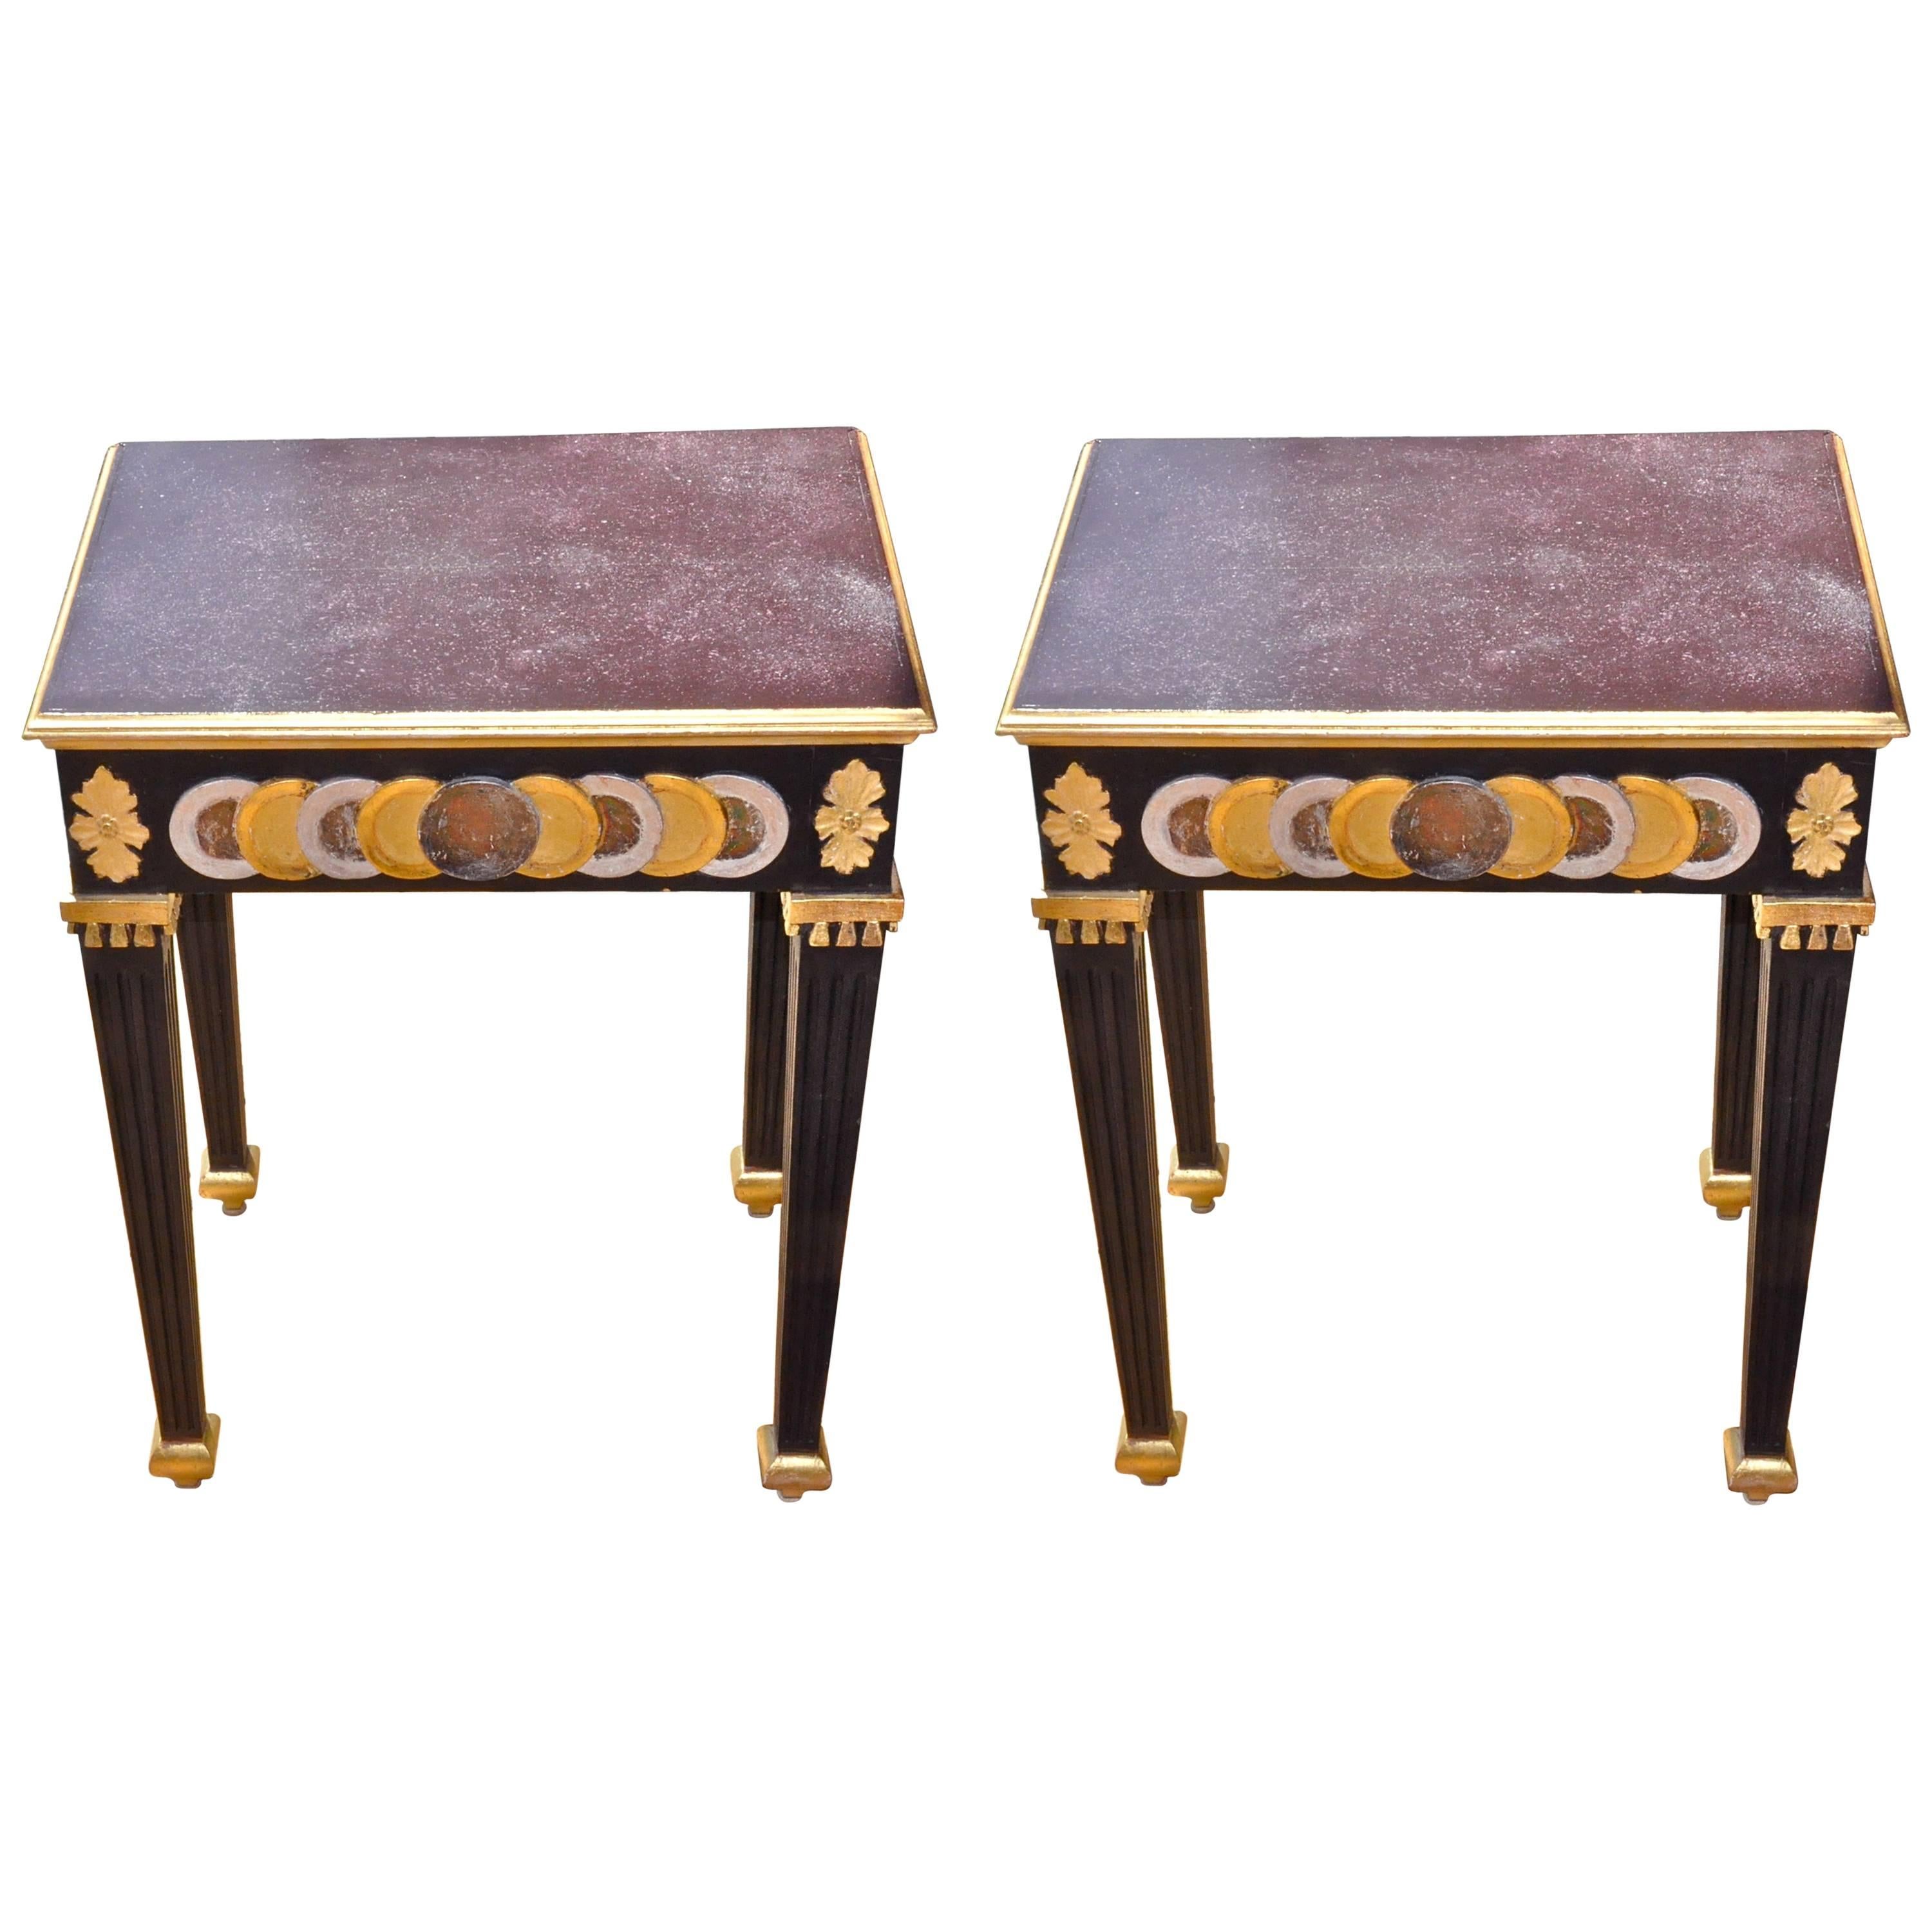 Pair of Faux Porphyry Painted Side Tables